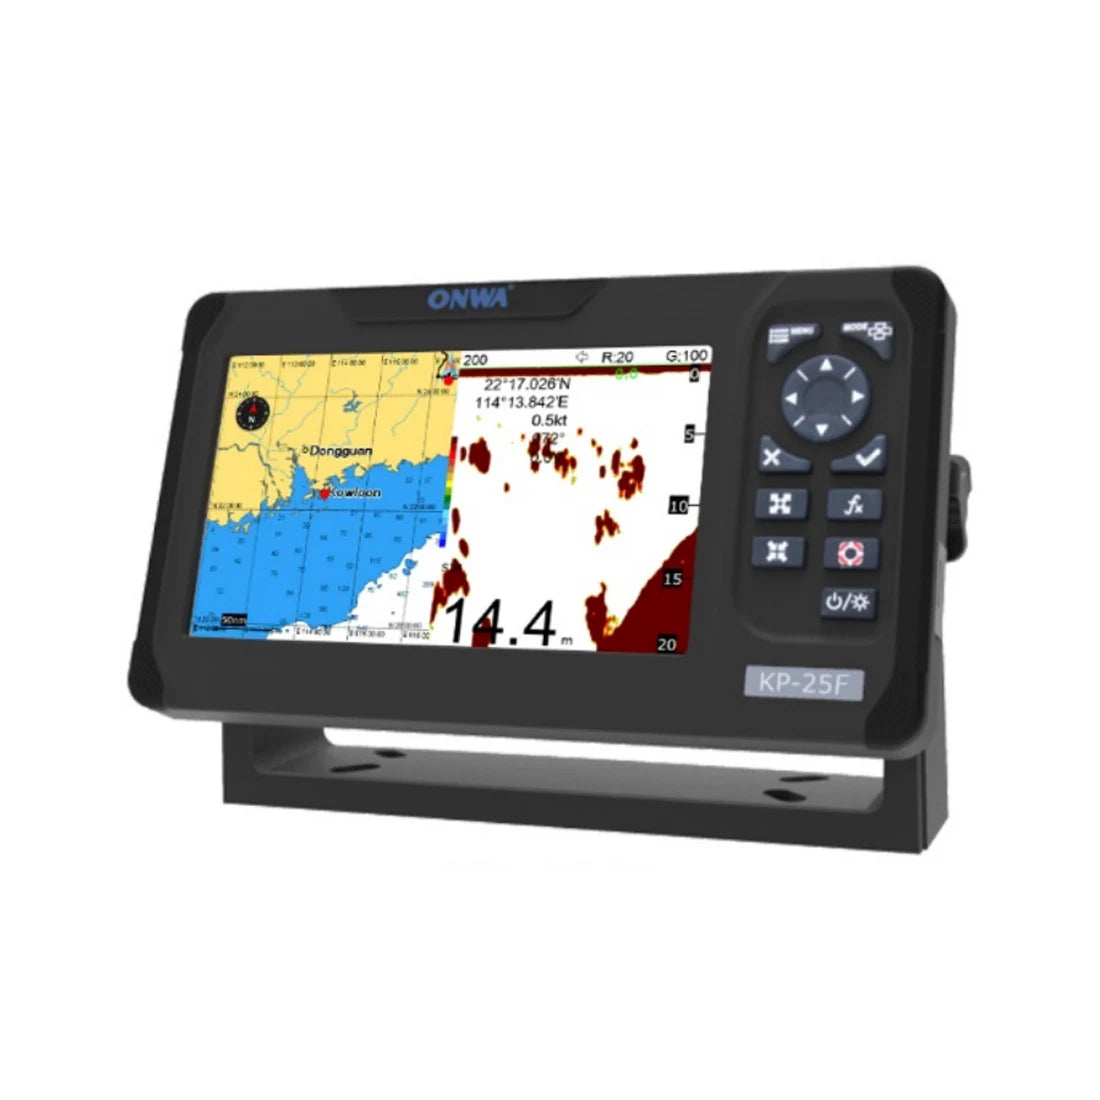 ONWA KP-25F 5-inch Marine GPS Chart Plotter with fish finder KP-25 series